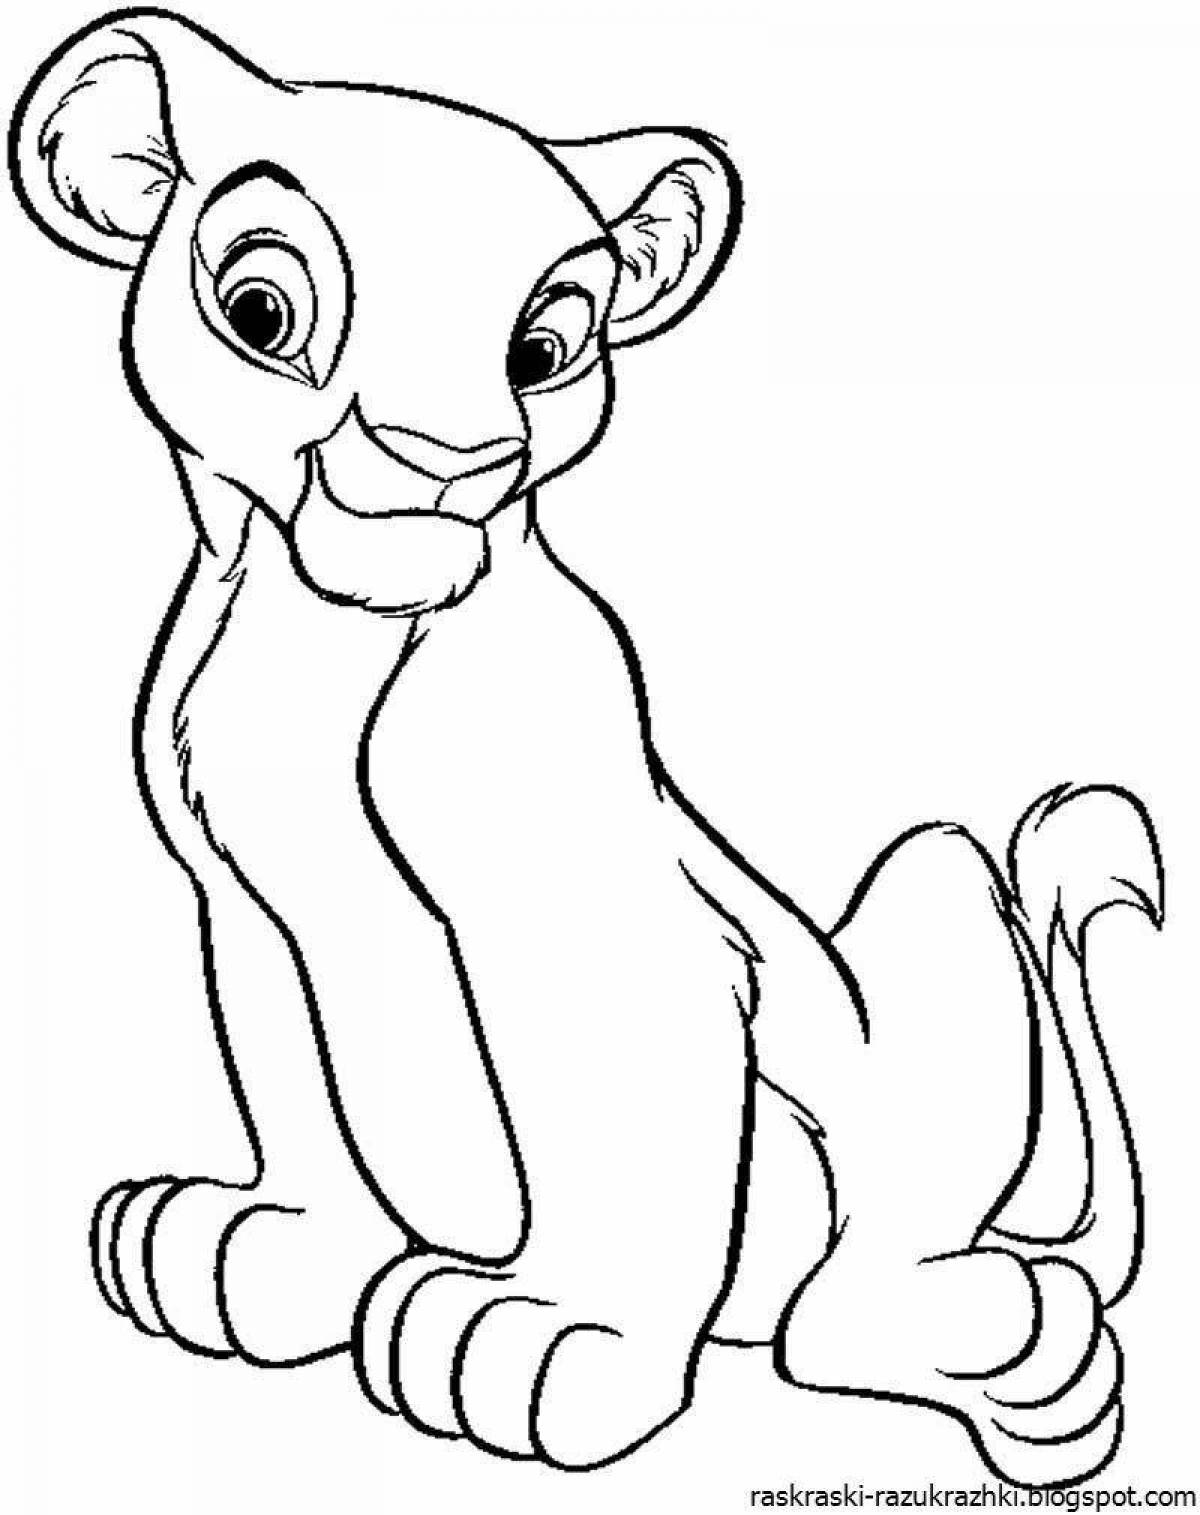 Simba's amazing coloring book for kids